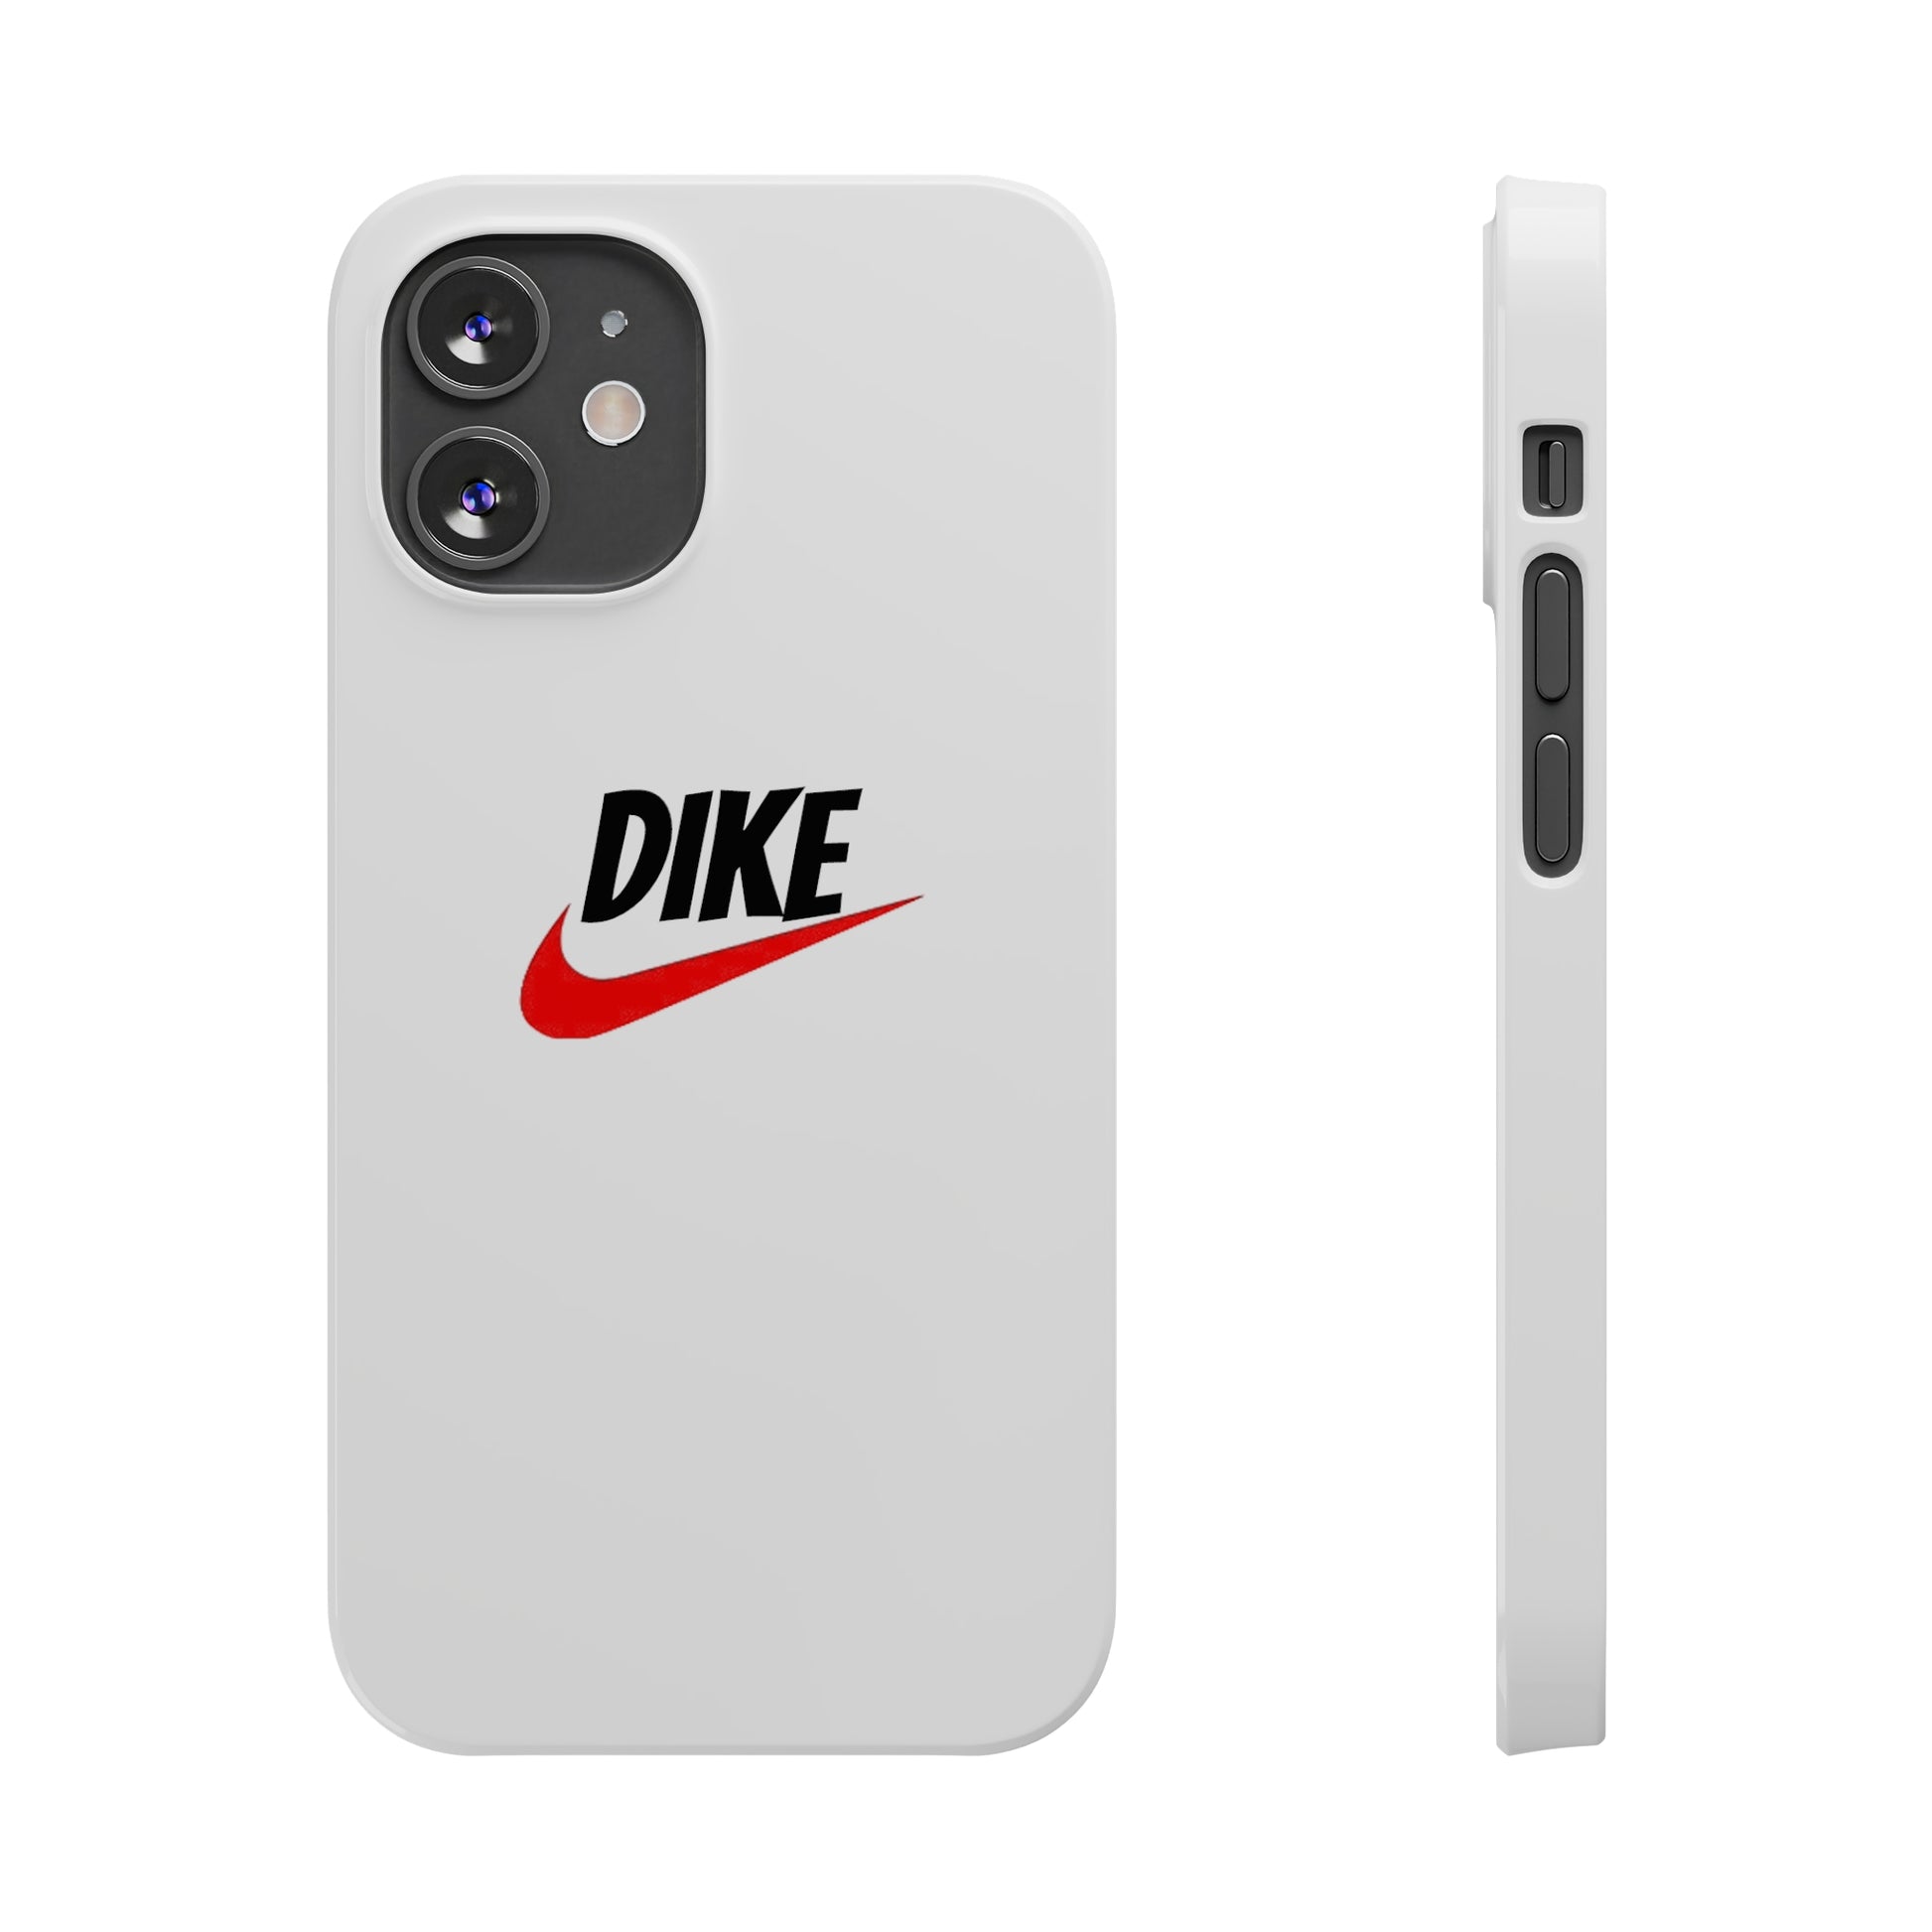 "Dike" MagStrong Phone Cases iPhone 12 Mini